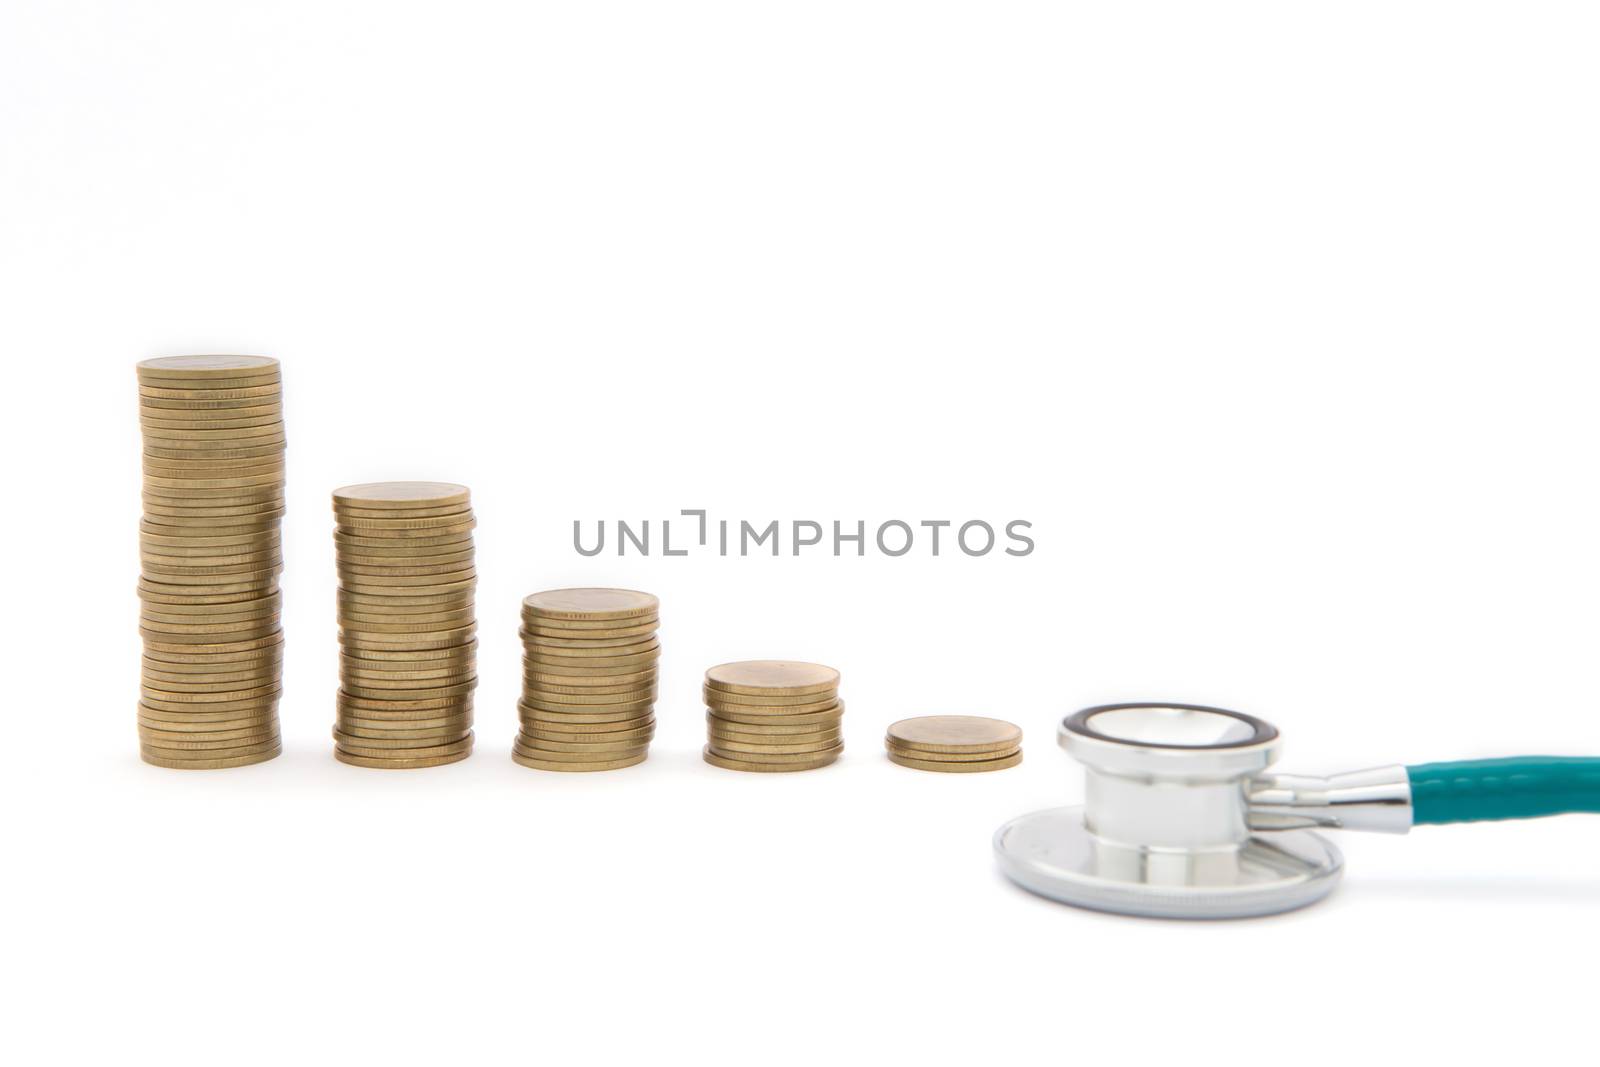 Stethoscope over  coins. Concept of saving bad economy by rufous